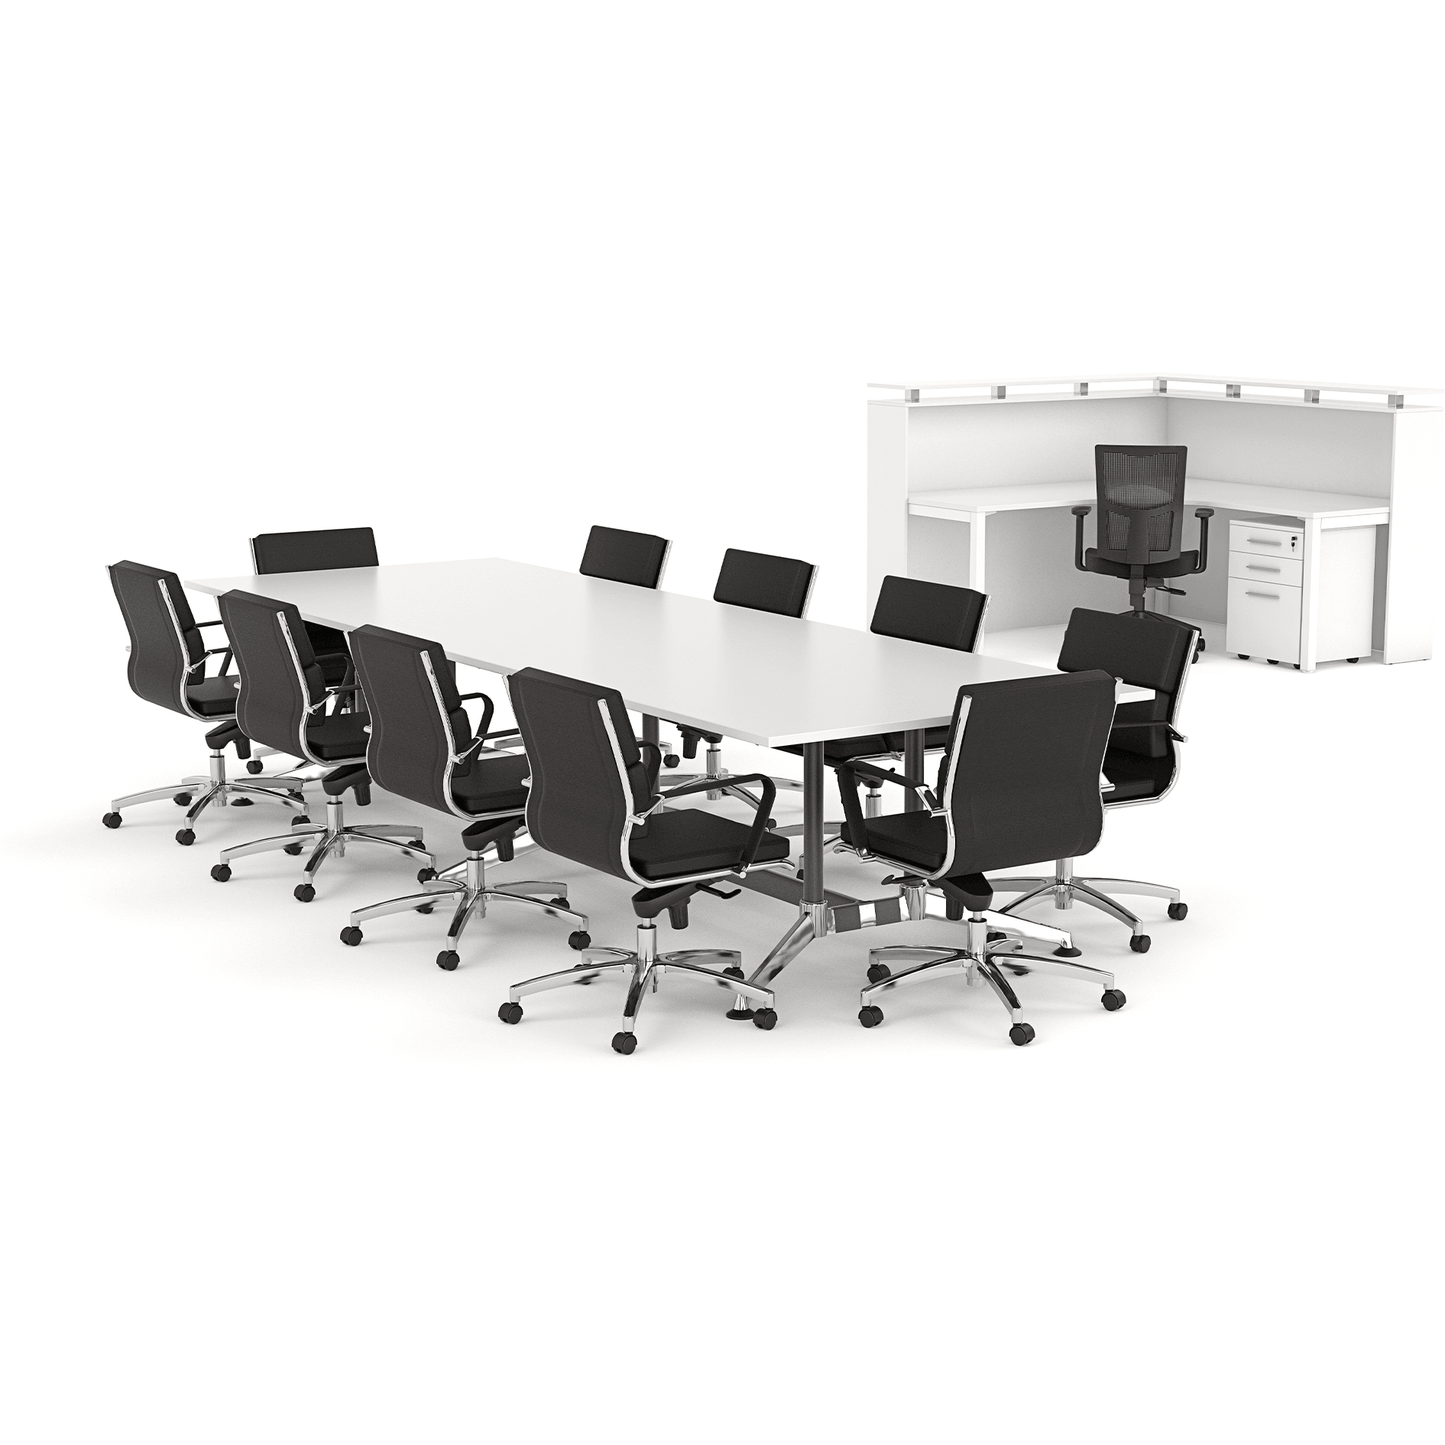 Mode Executive Office Chair - Office Furniture Company 